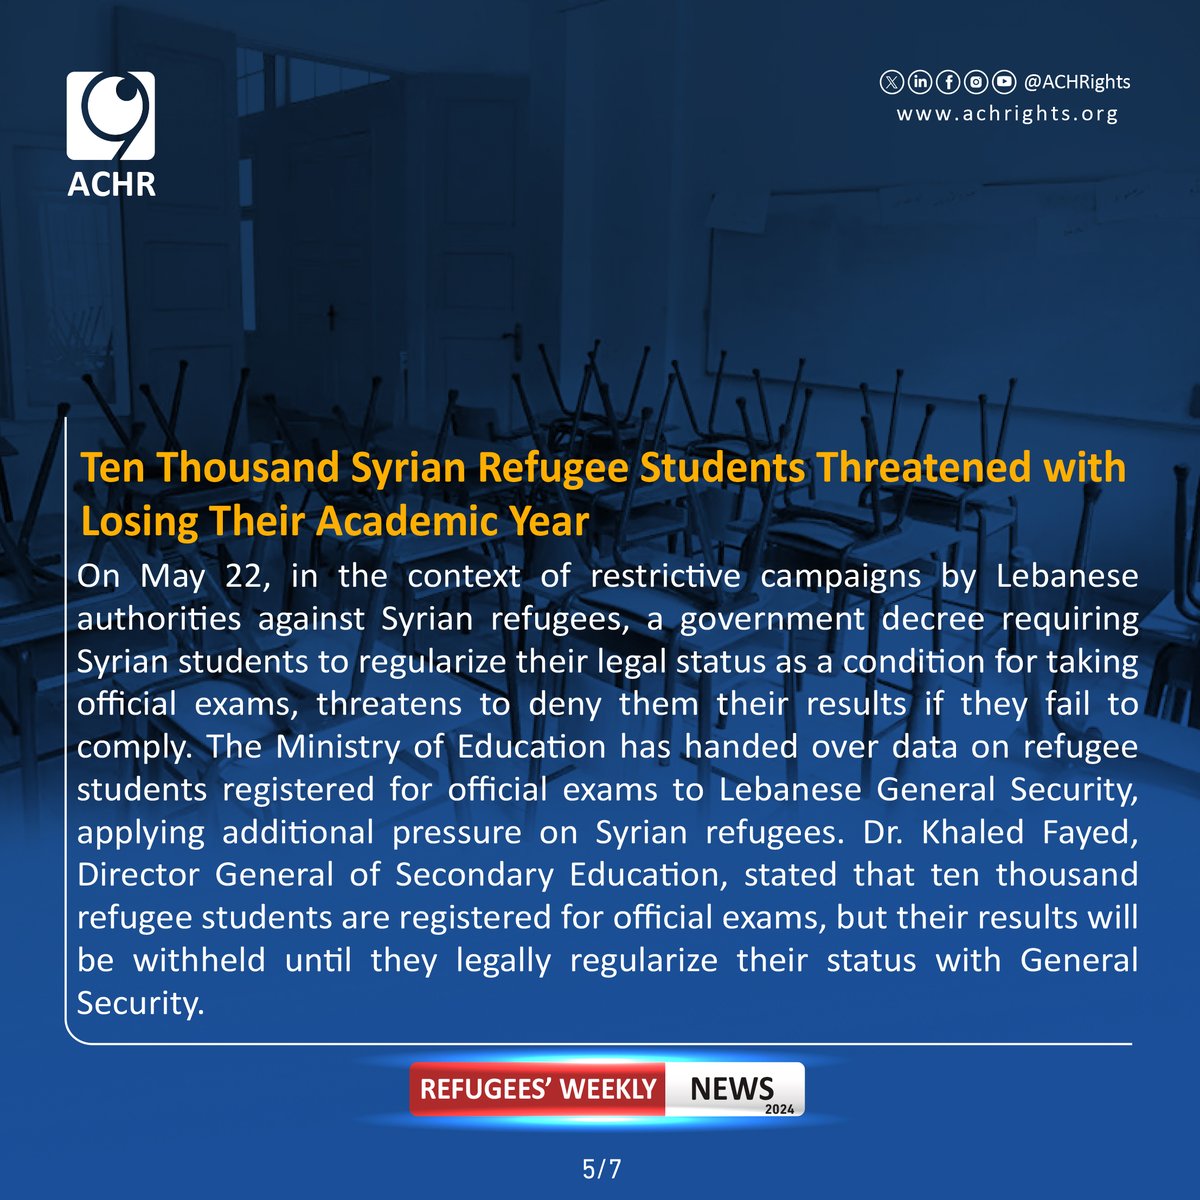 Ten Thousand Syrian Refugee Students Threatened with Losing Their Academic Year.
#Together_for_Human_Rights #weeklynews #violations #humanrights #syrianrefugees #lebanon #syria #RefugeesRight